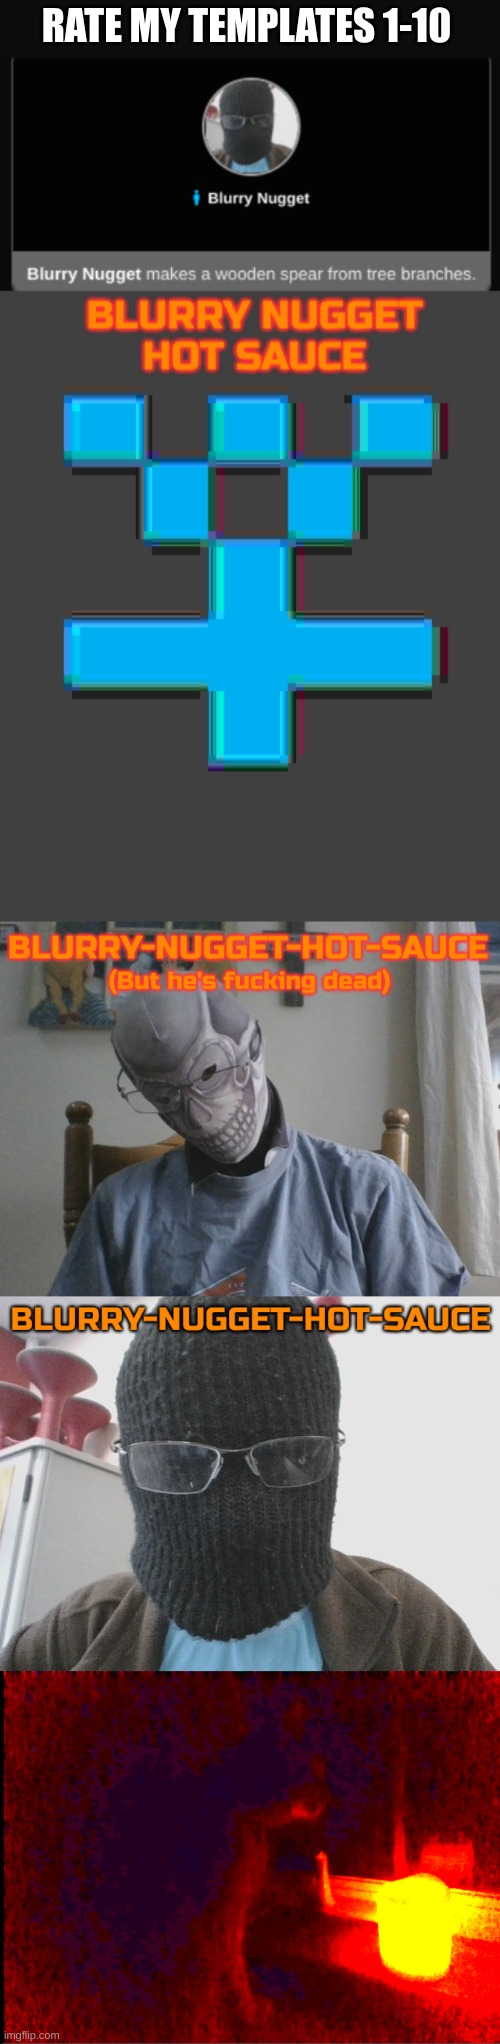 I deleted my first temp cuz it sucked ass | RATE MY TEMPLATES 1-10 | image tagged in blurry-nugget makes a wooden spear,blurry-nugget-hot-sauce announcement template,blurry-nugget-hot-sauce but he's f cking dead | made w/ Imgflip meme maker